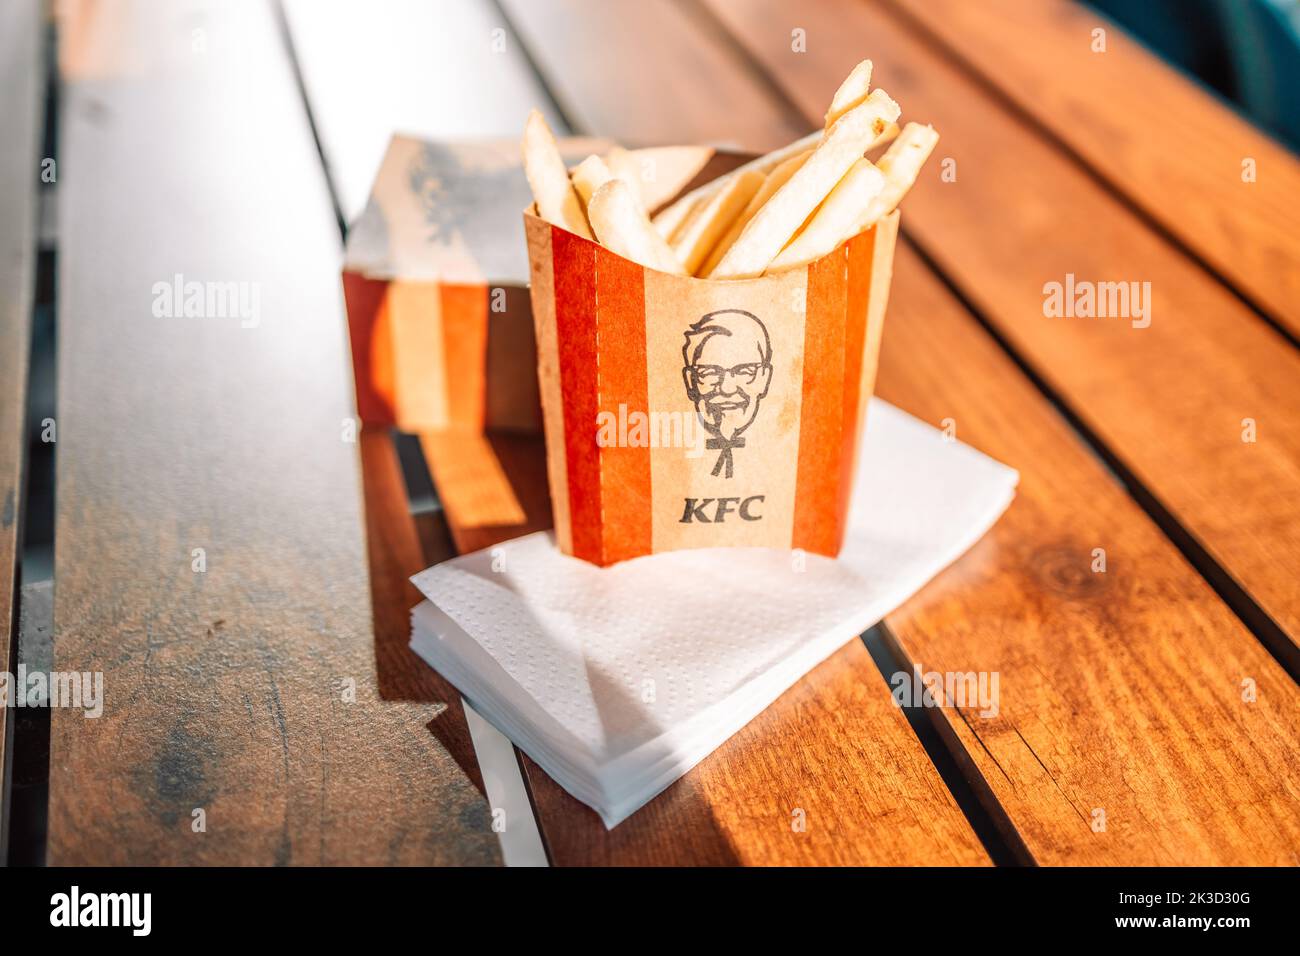 Krakow, Poland - September 11 2022: KFC fast food Fried Chicken (also known as Kentucky Fried Chicken) small box ready to serve to customer, KFC is a Stock Photo